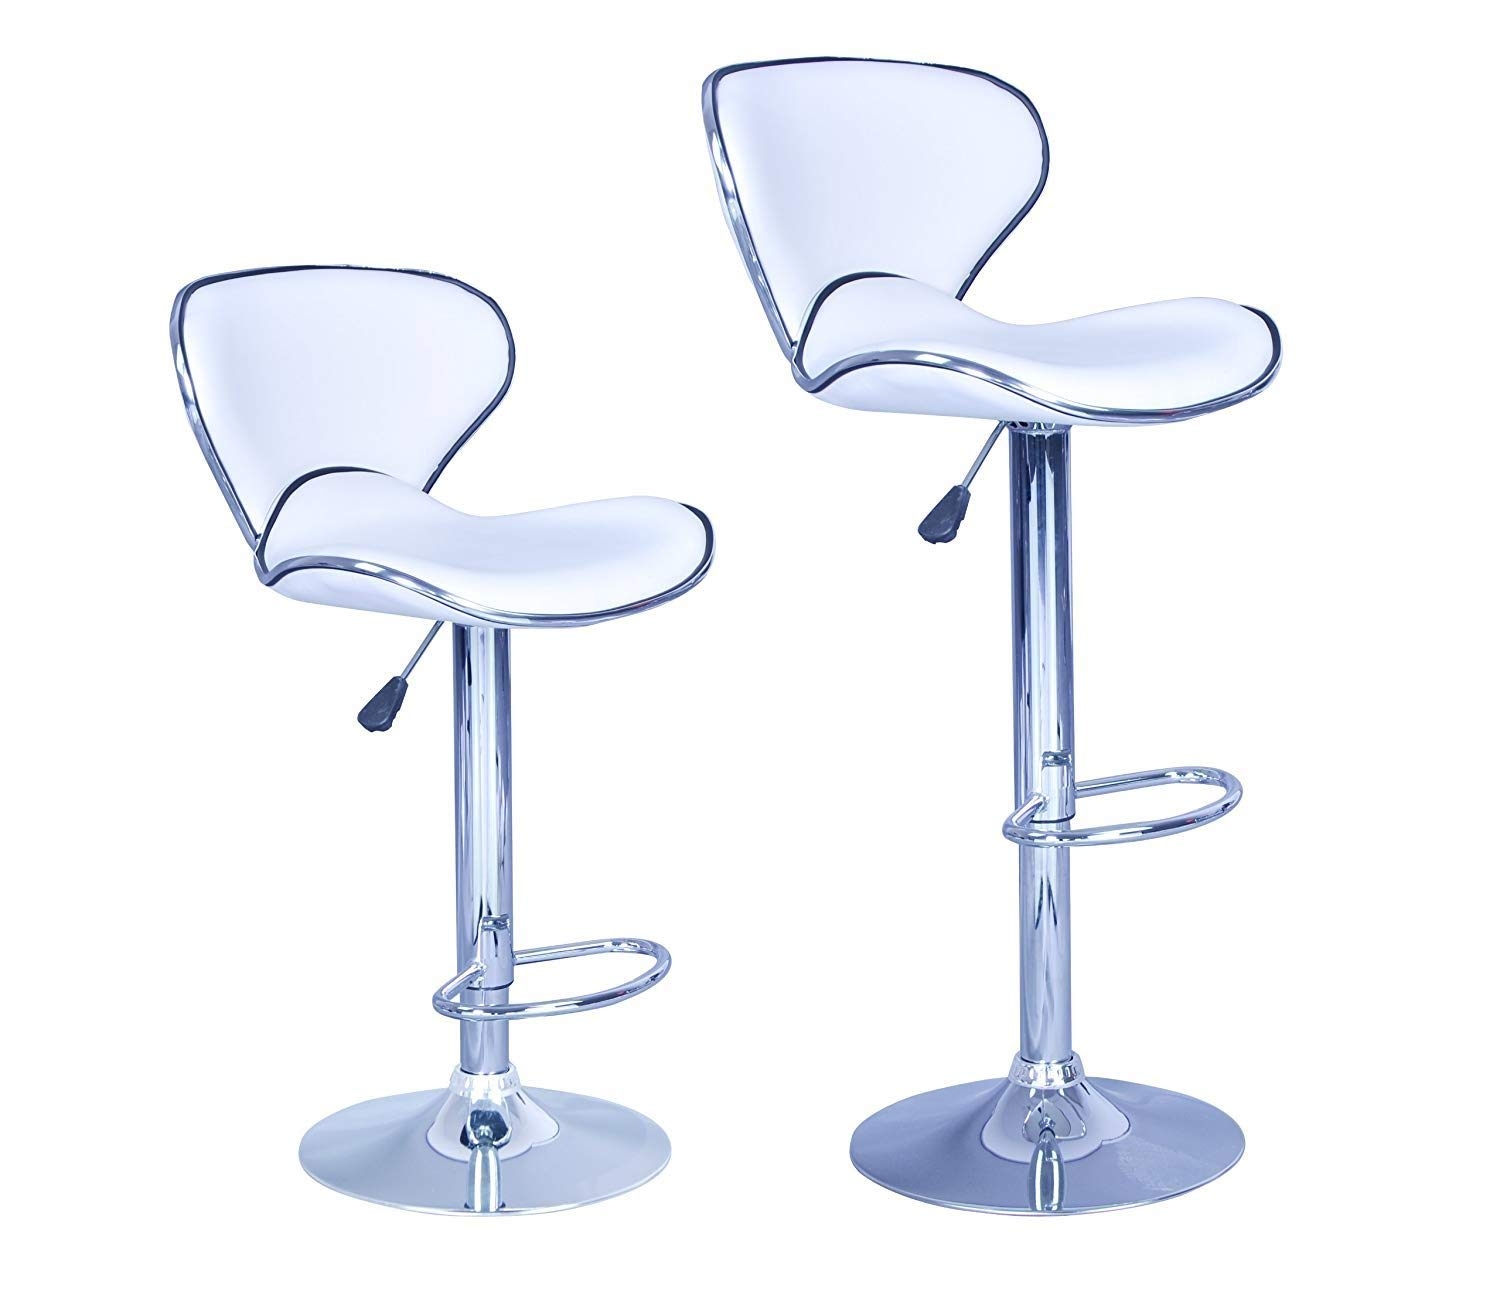 White Modern Adjustable Synthetic Leather Swivel Bar Stools Chairs B03-Sets of 2